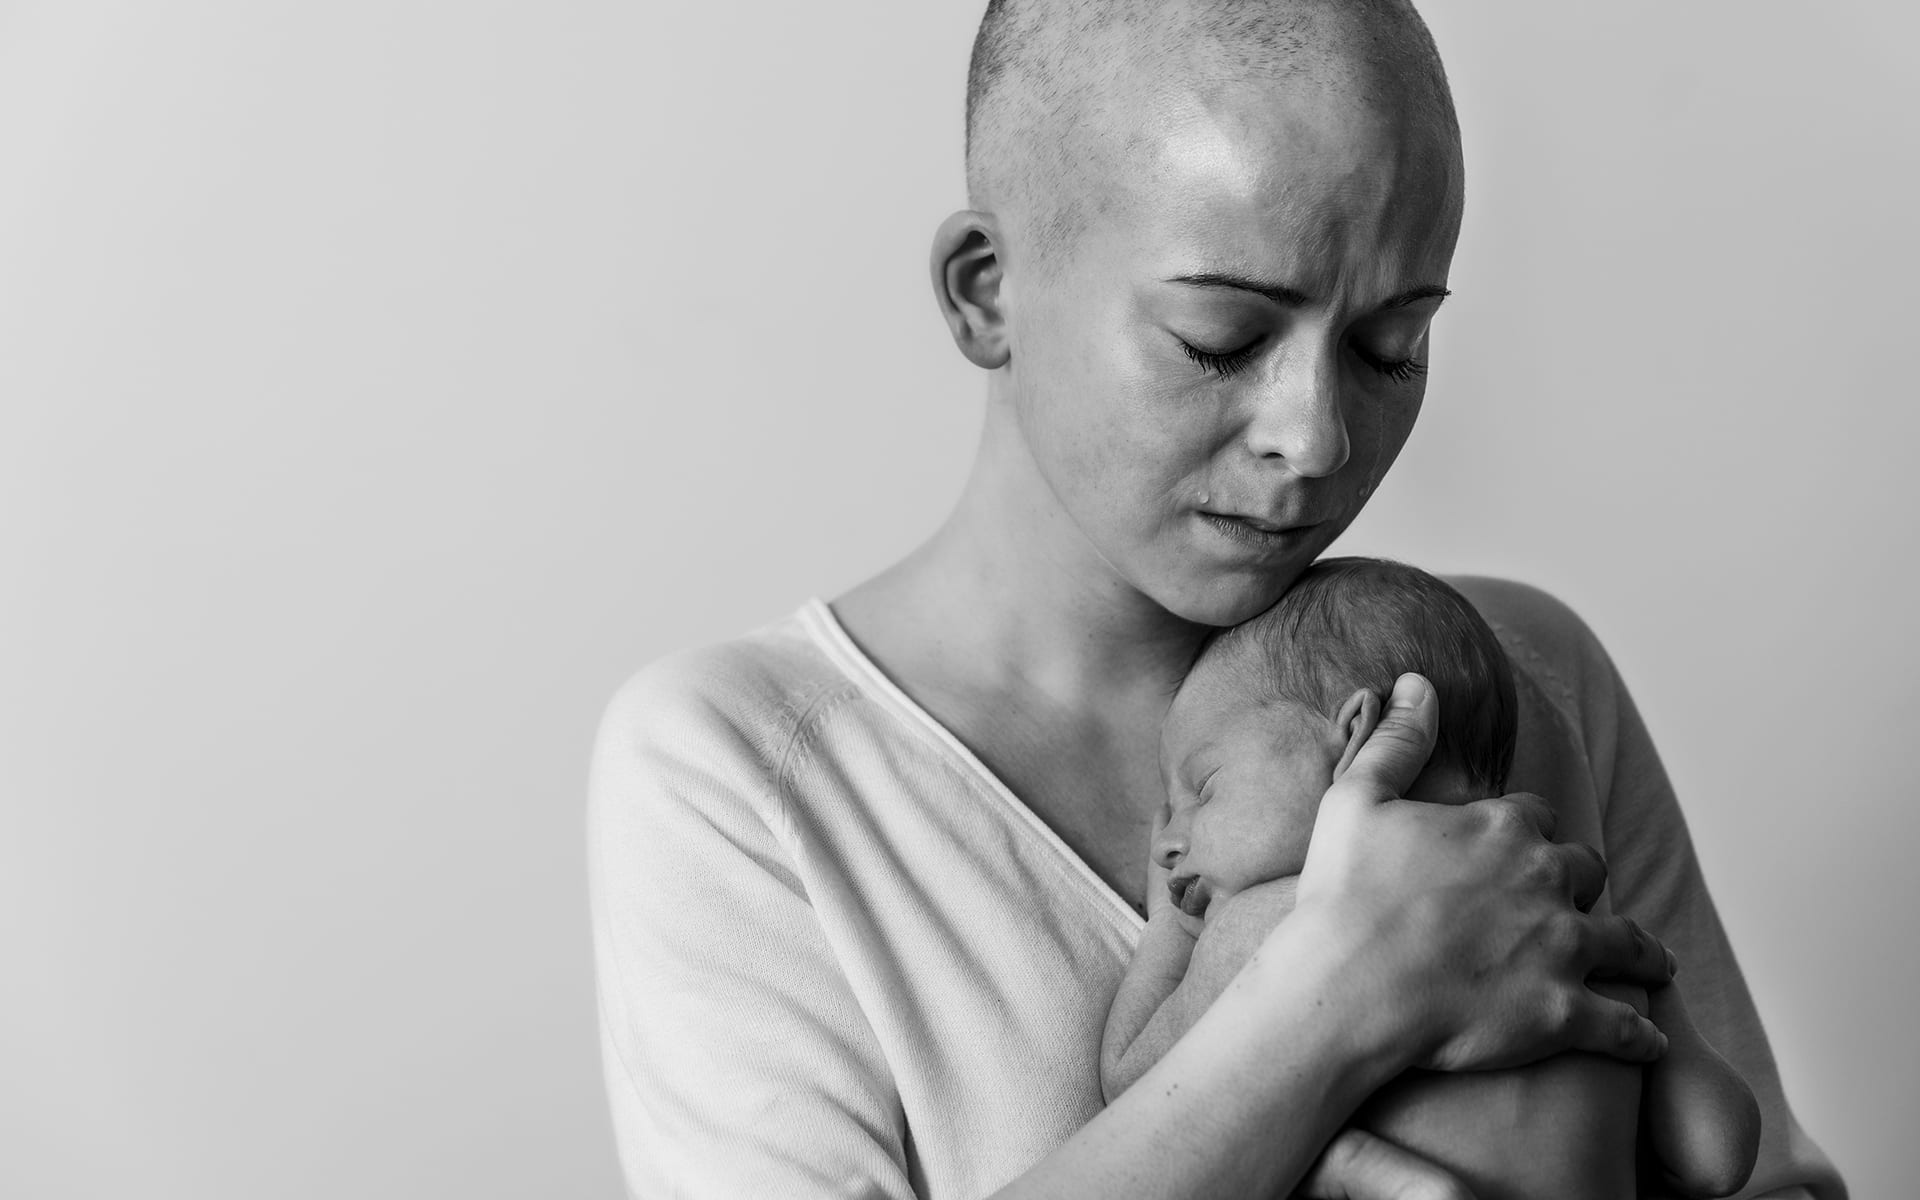 portrait of bald cancer patient crying while holding her newborn